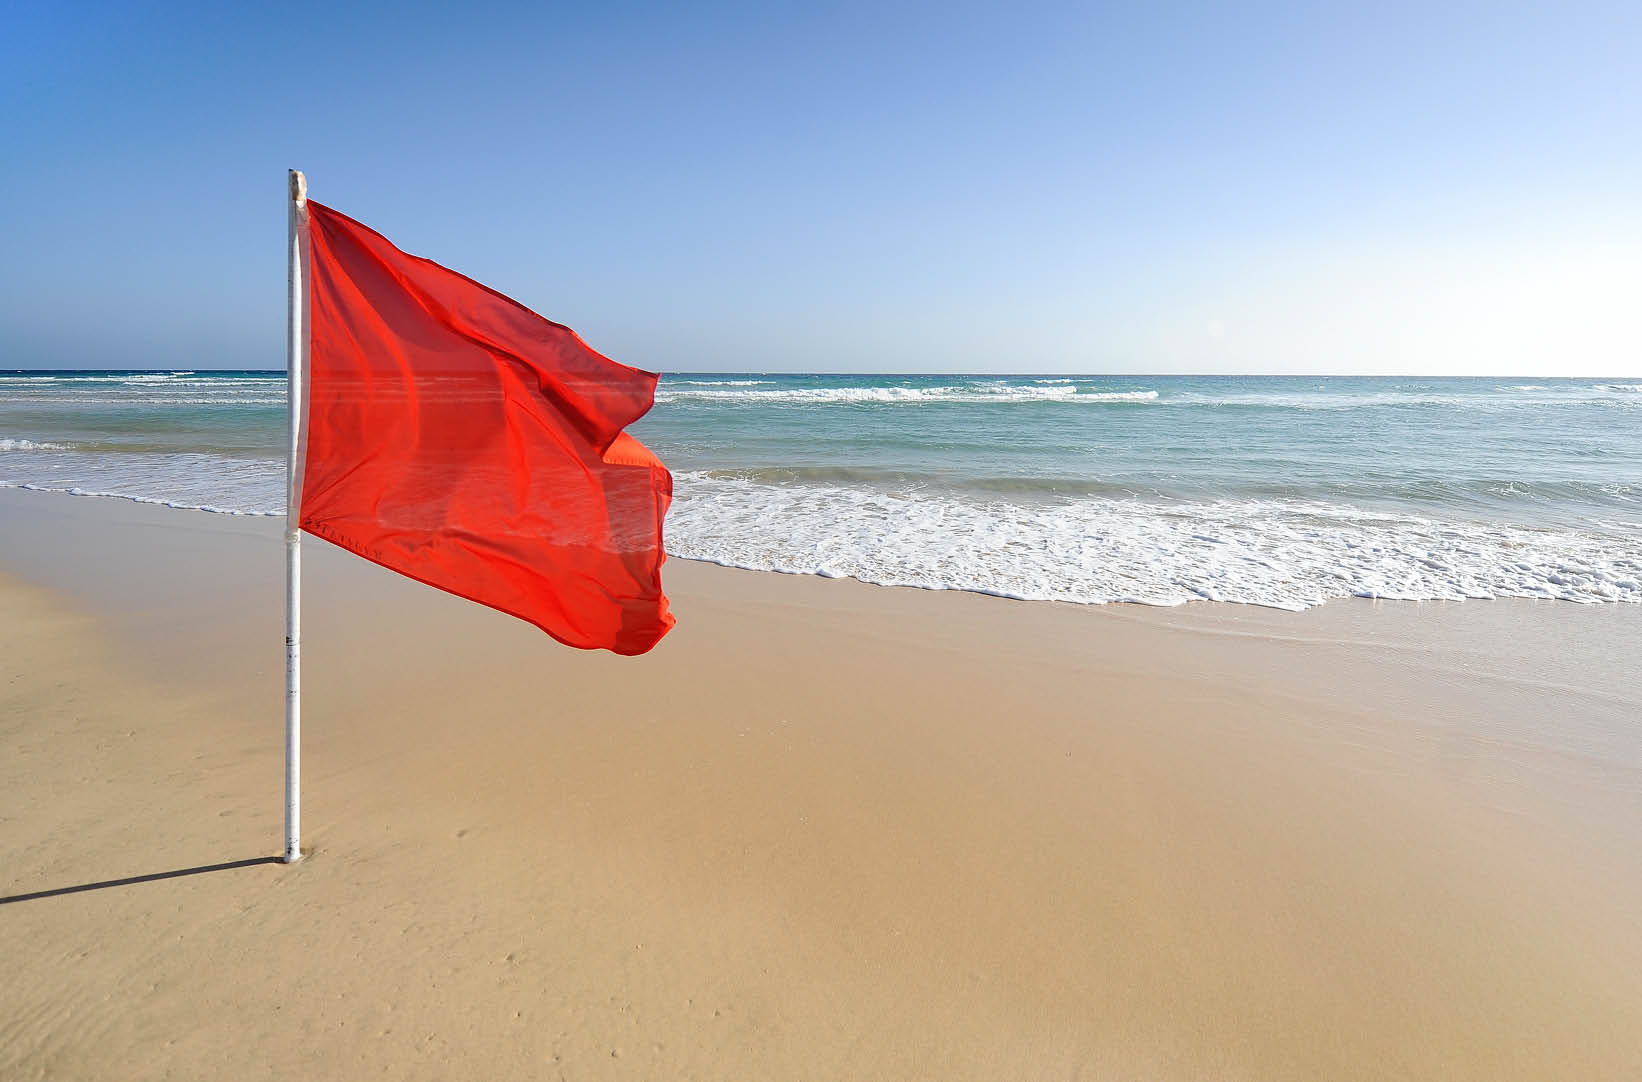 A warning sign of a red flag at a beautiful beach with a blue sky and a turquoise sea